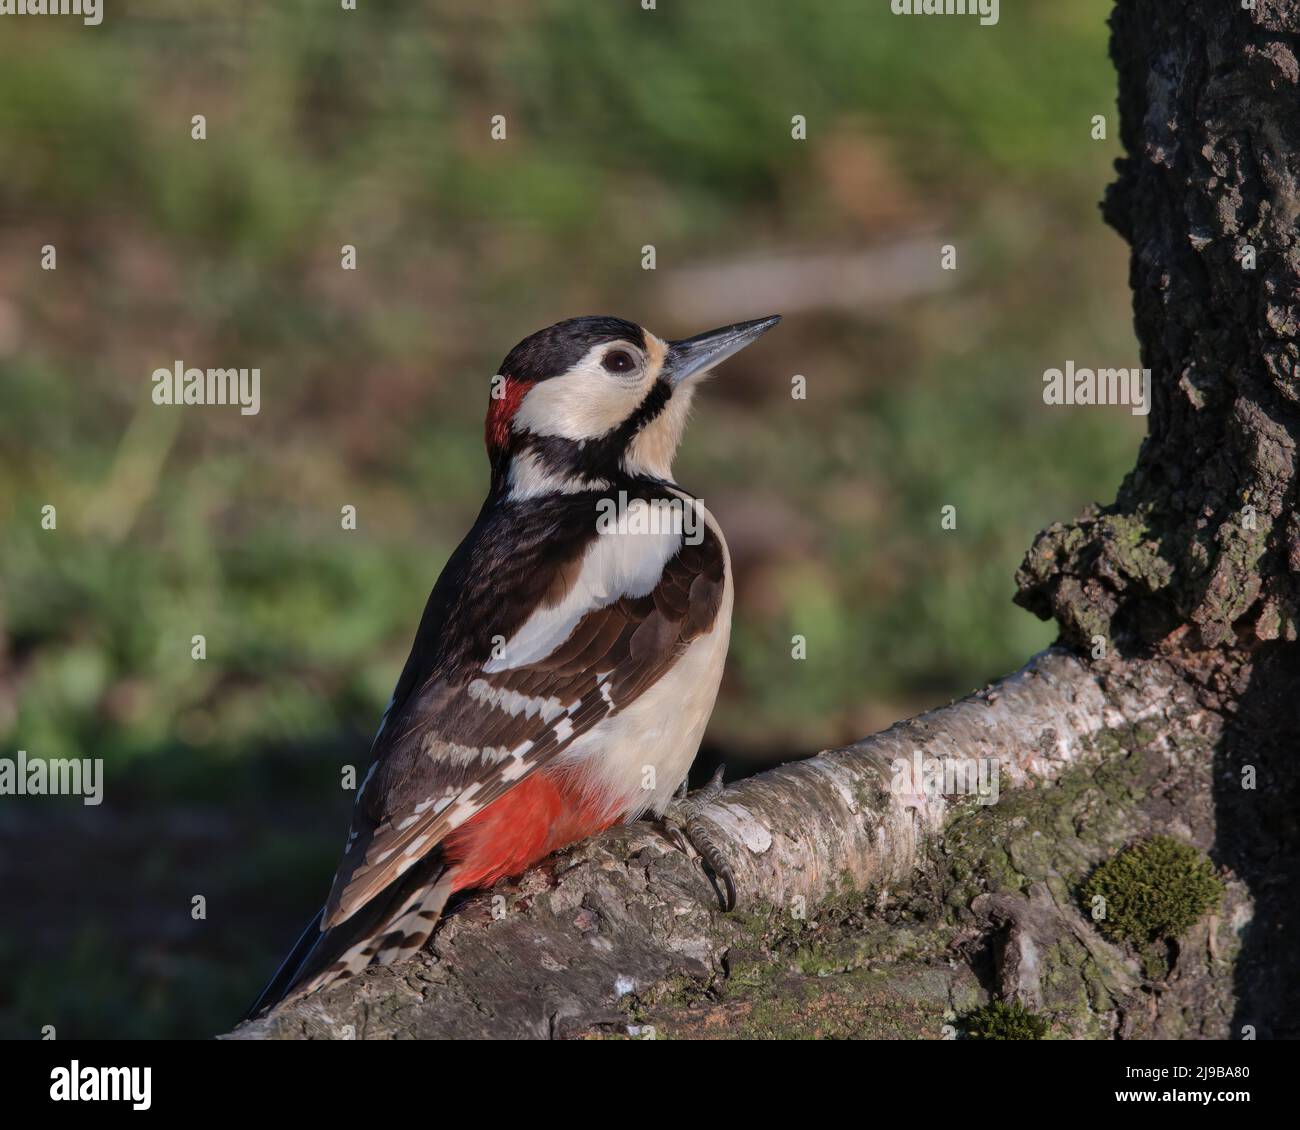 Male great spotted woodpecker perched on a tree root. Stock Photo